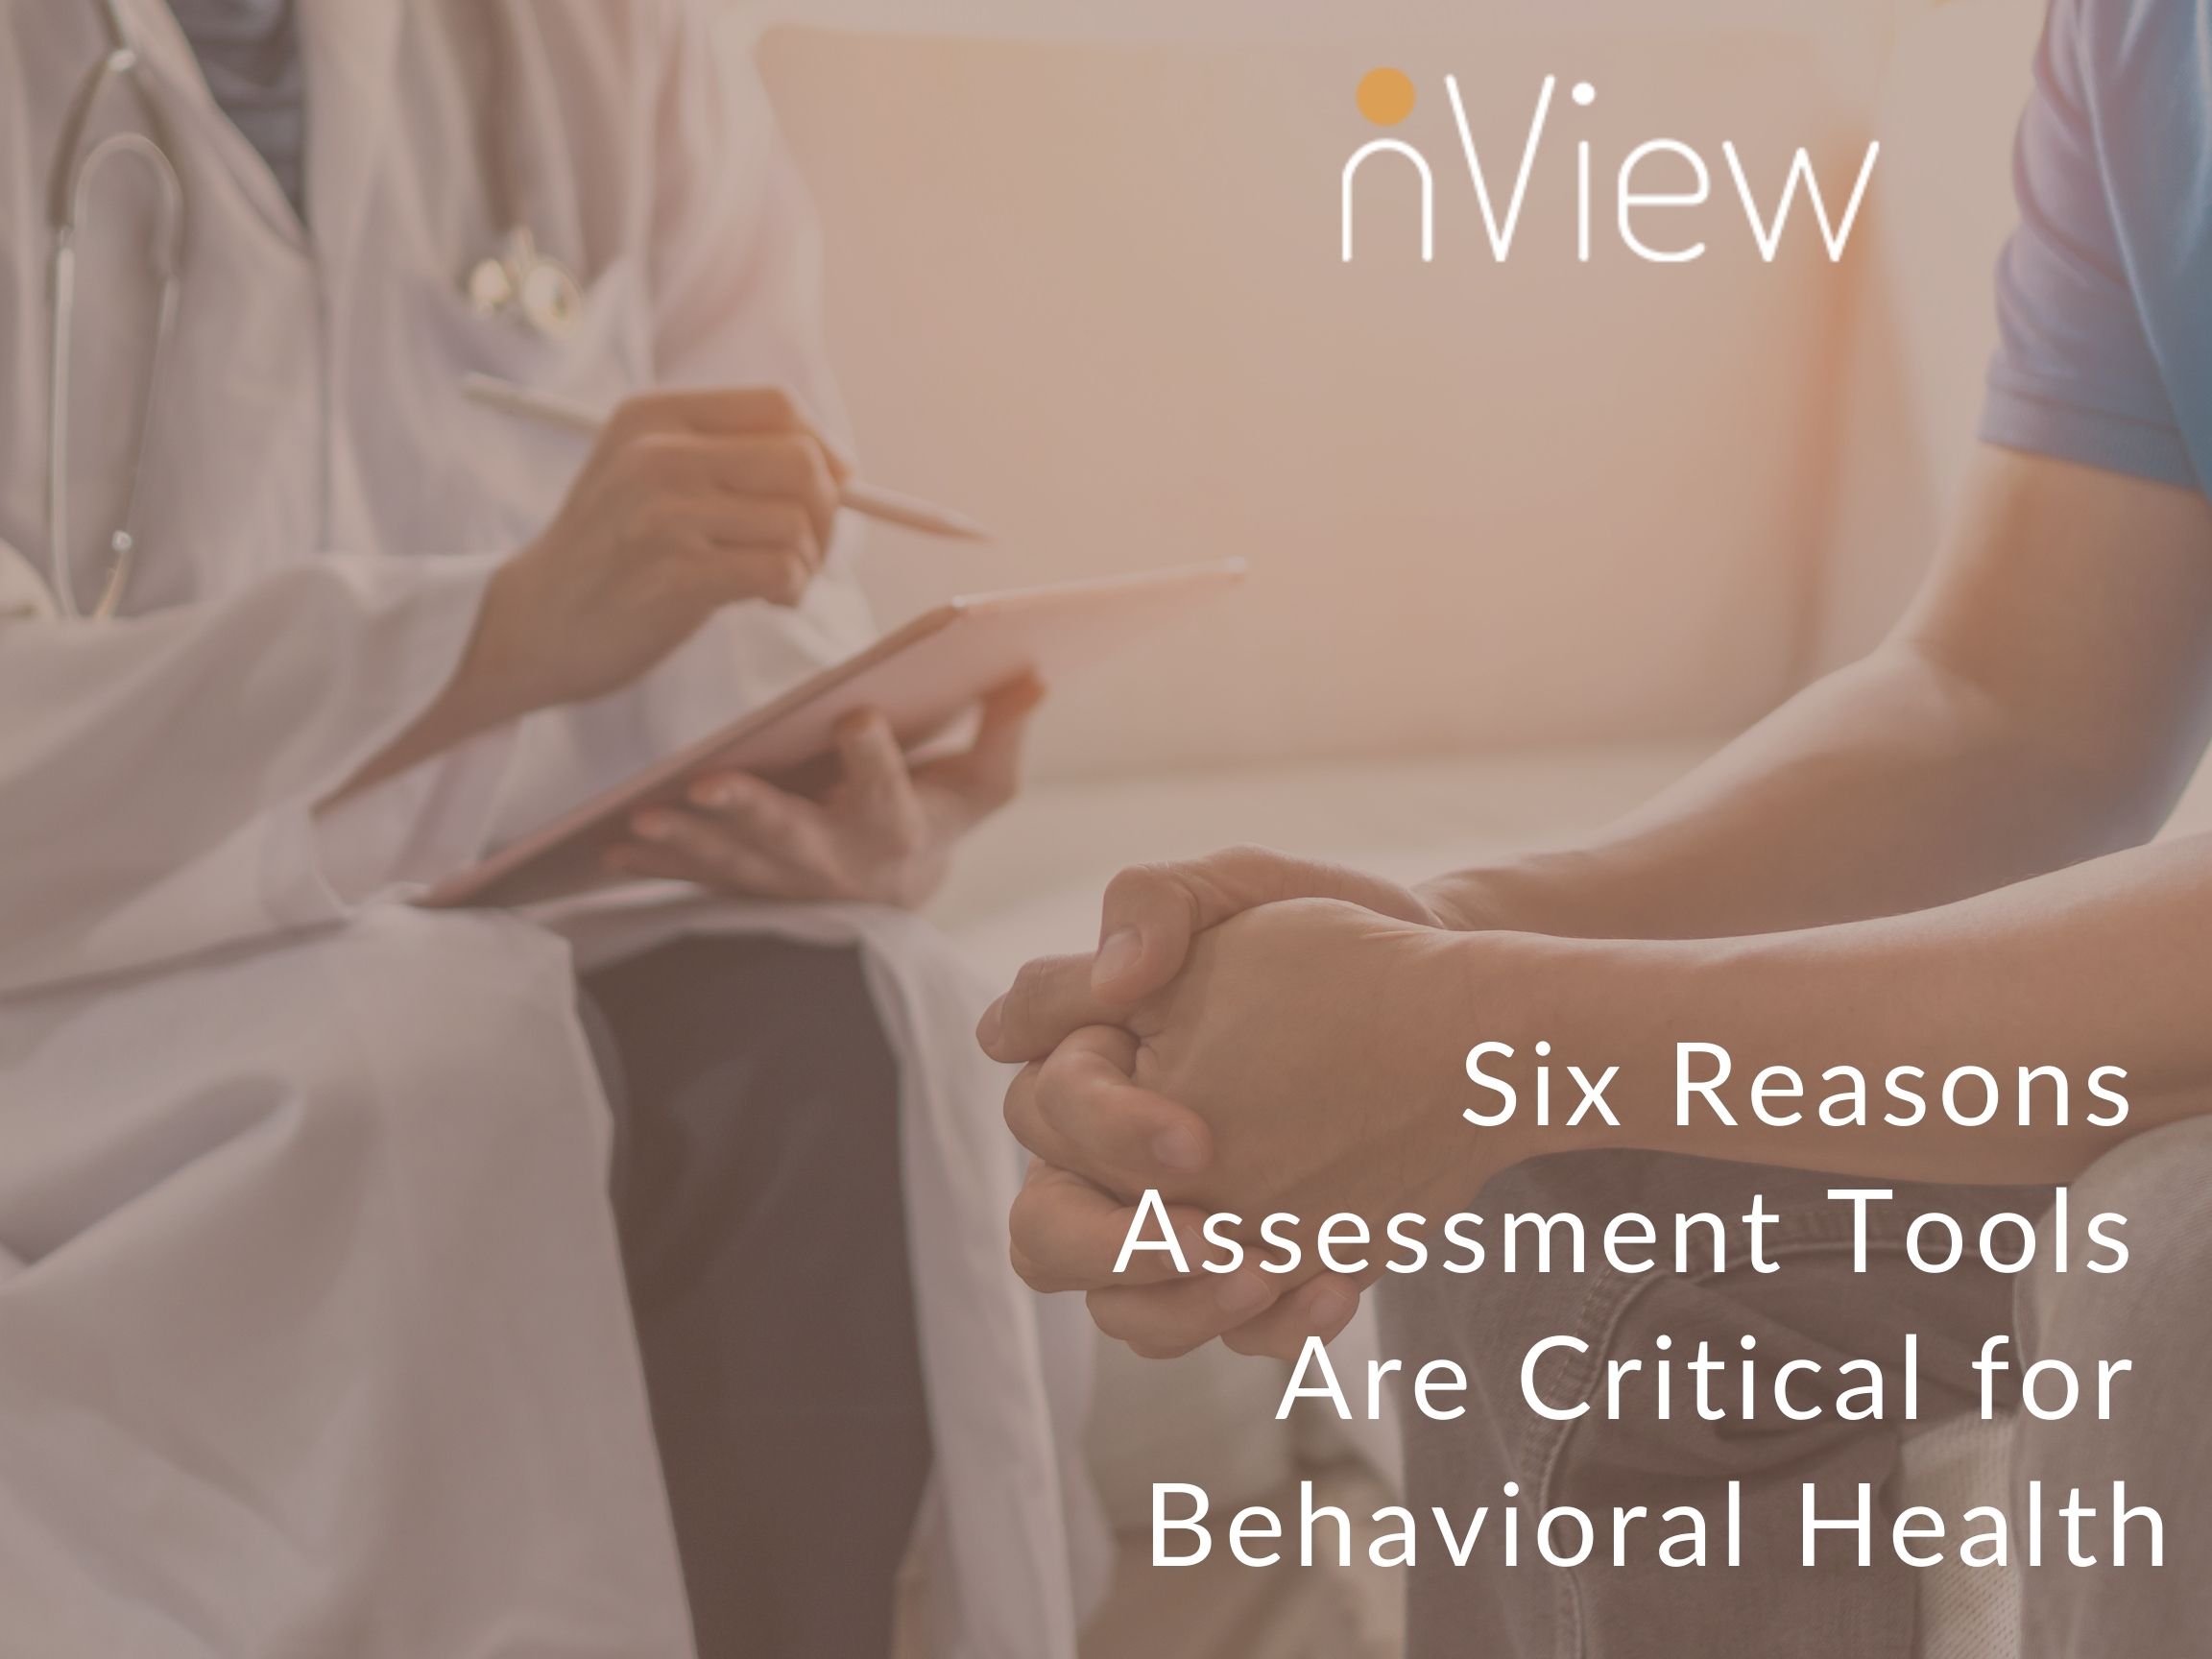 Six Reasons Assessment Tools Are Critical for Behavioral Health